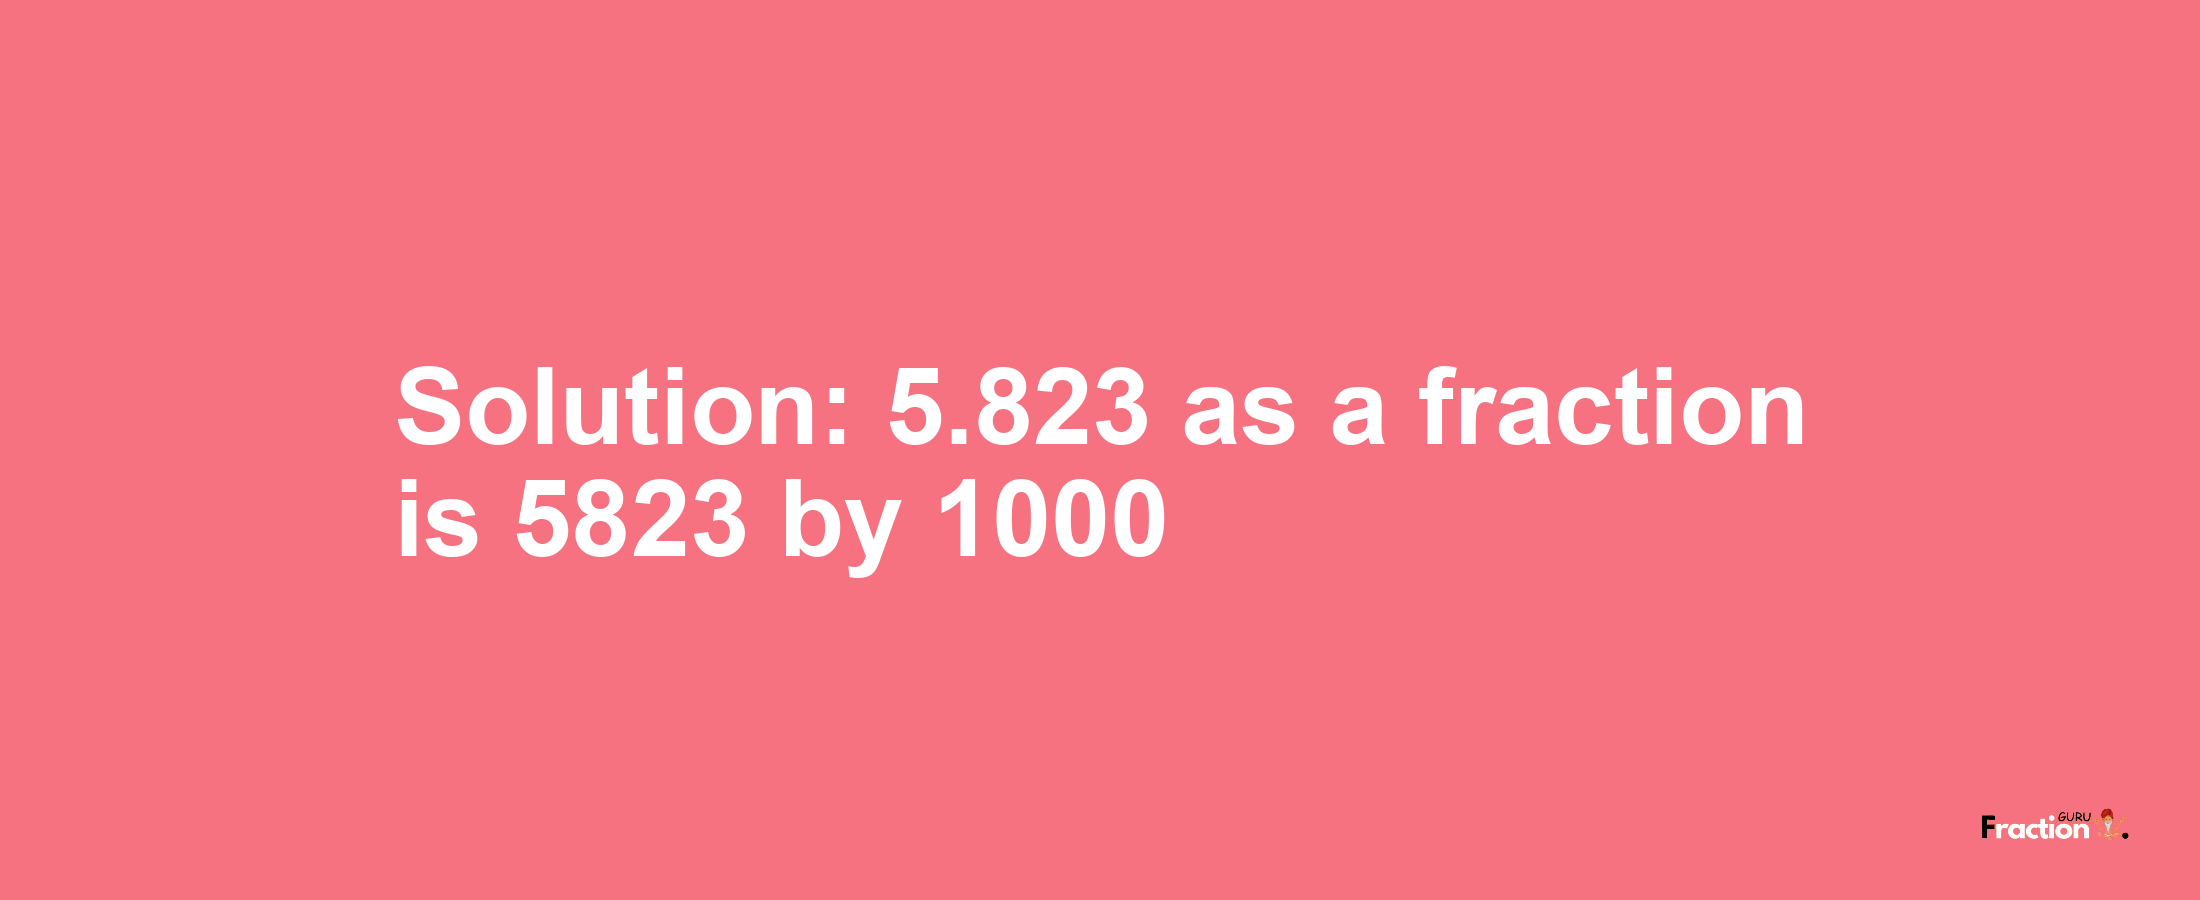 Solution:5.823 as a fraction is 5823/1000